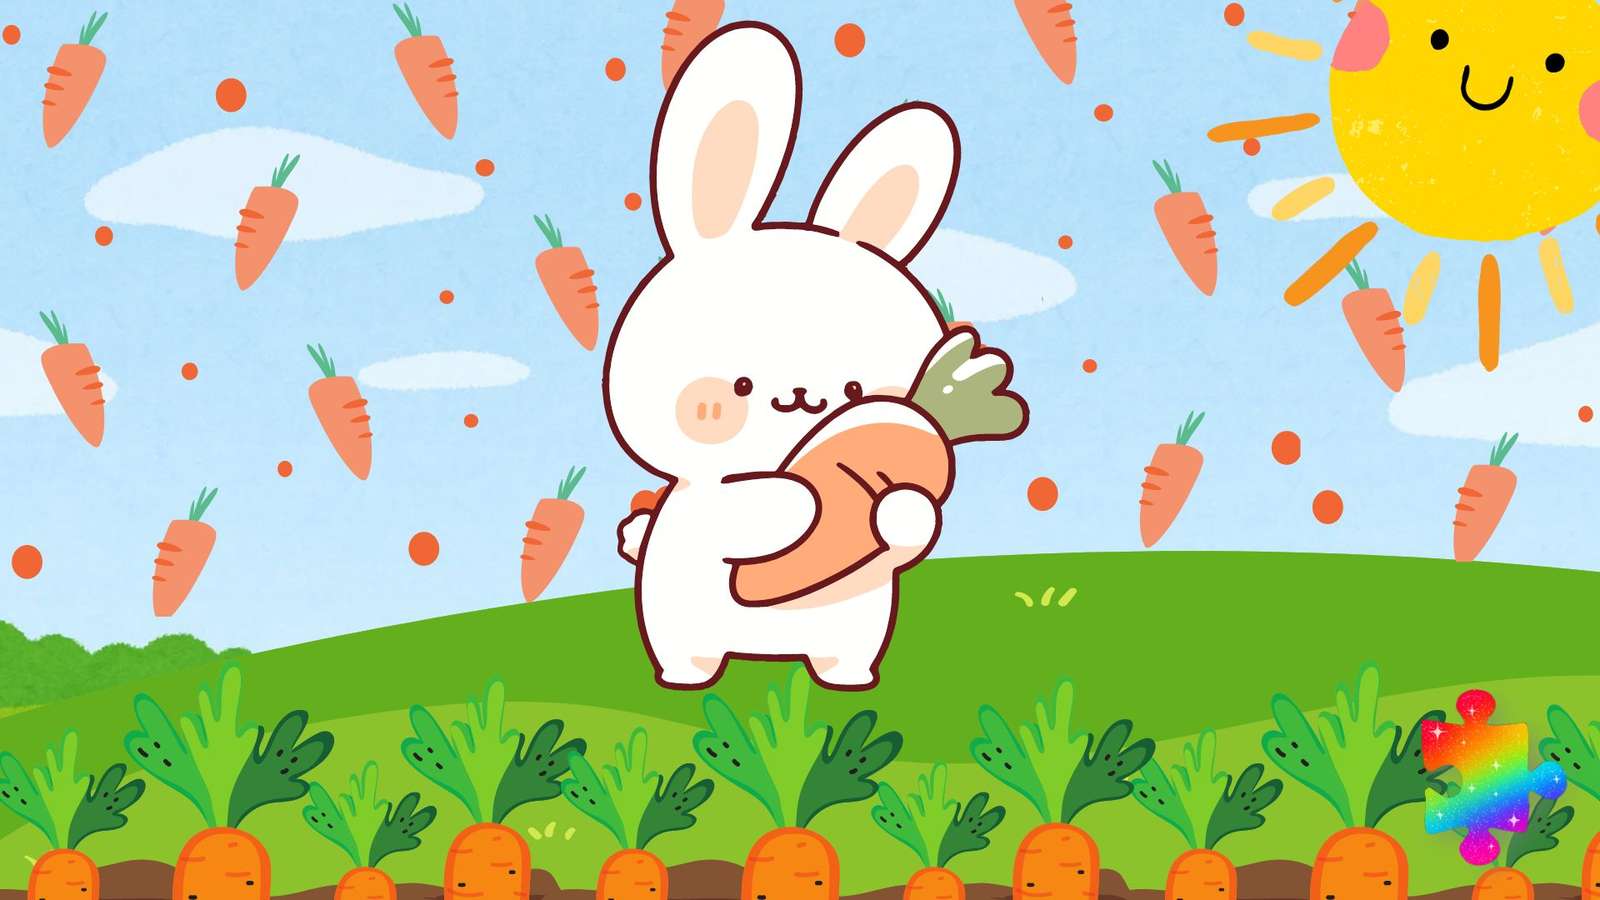 Bunny Loves Carrots online puzzle